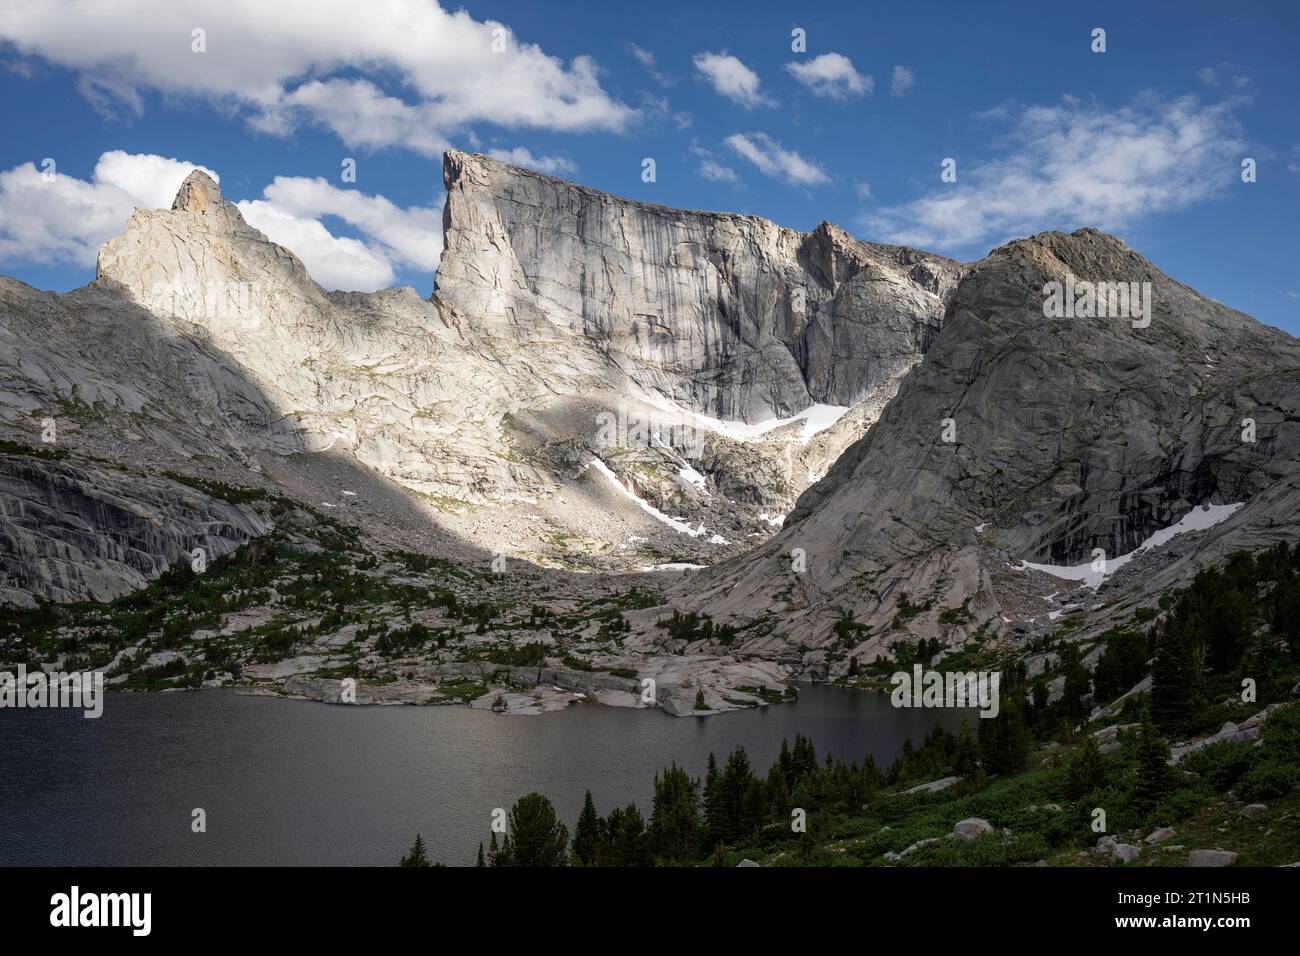 WY05455-00....WYOMING - East Temple Peak and Lost Temple Spire above Deep Lake, Bridger Wilderness, Bridger National Forest. Stock Photo